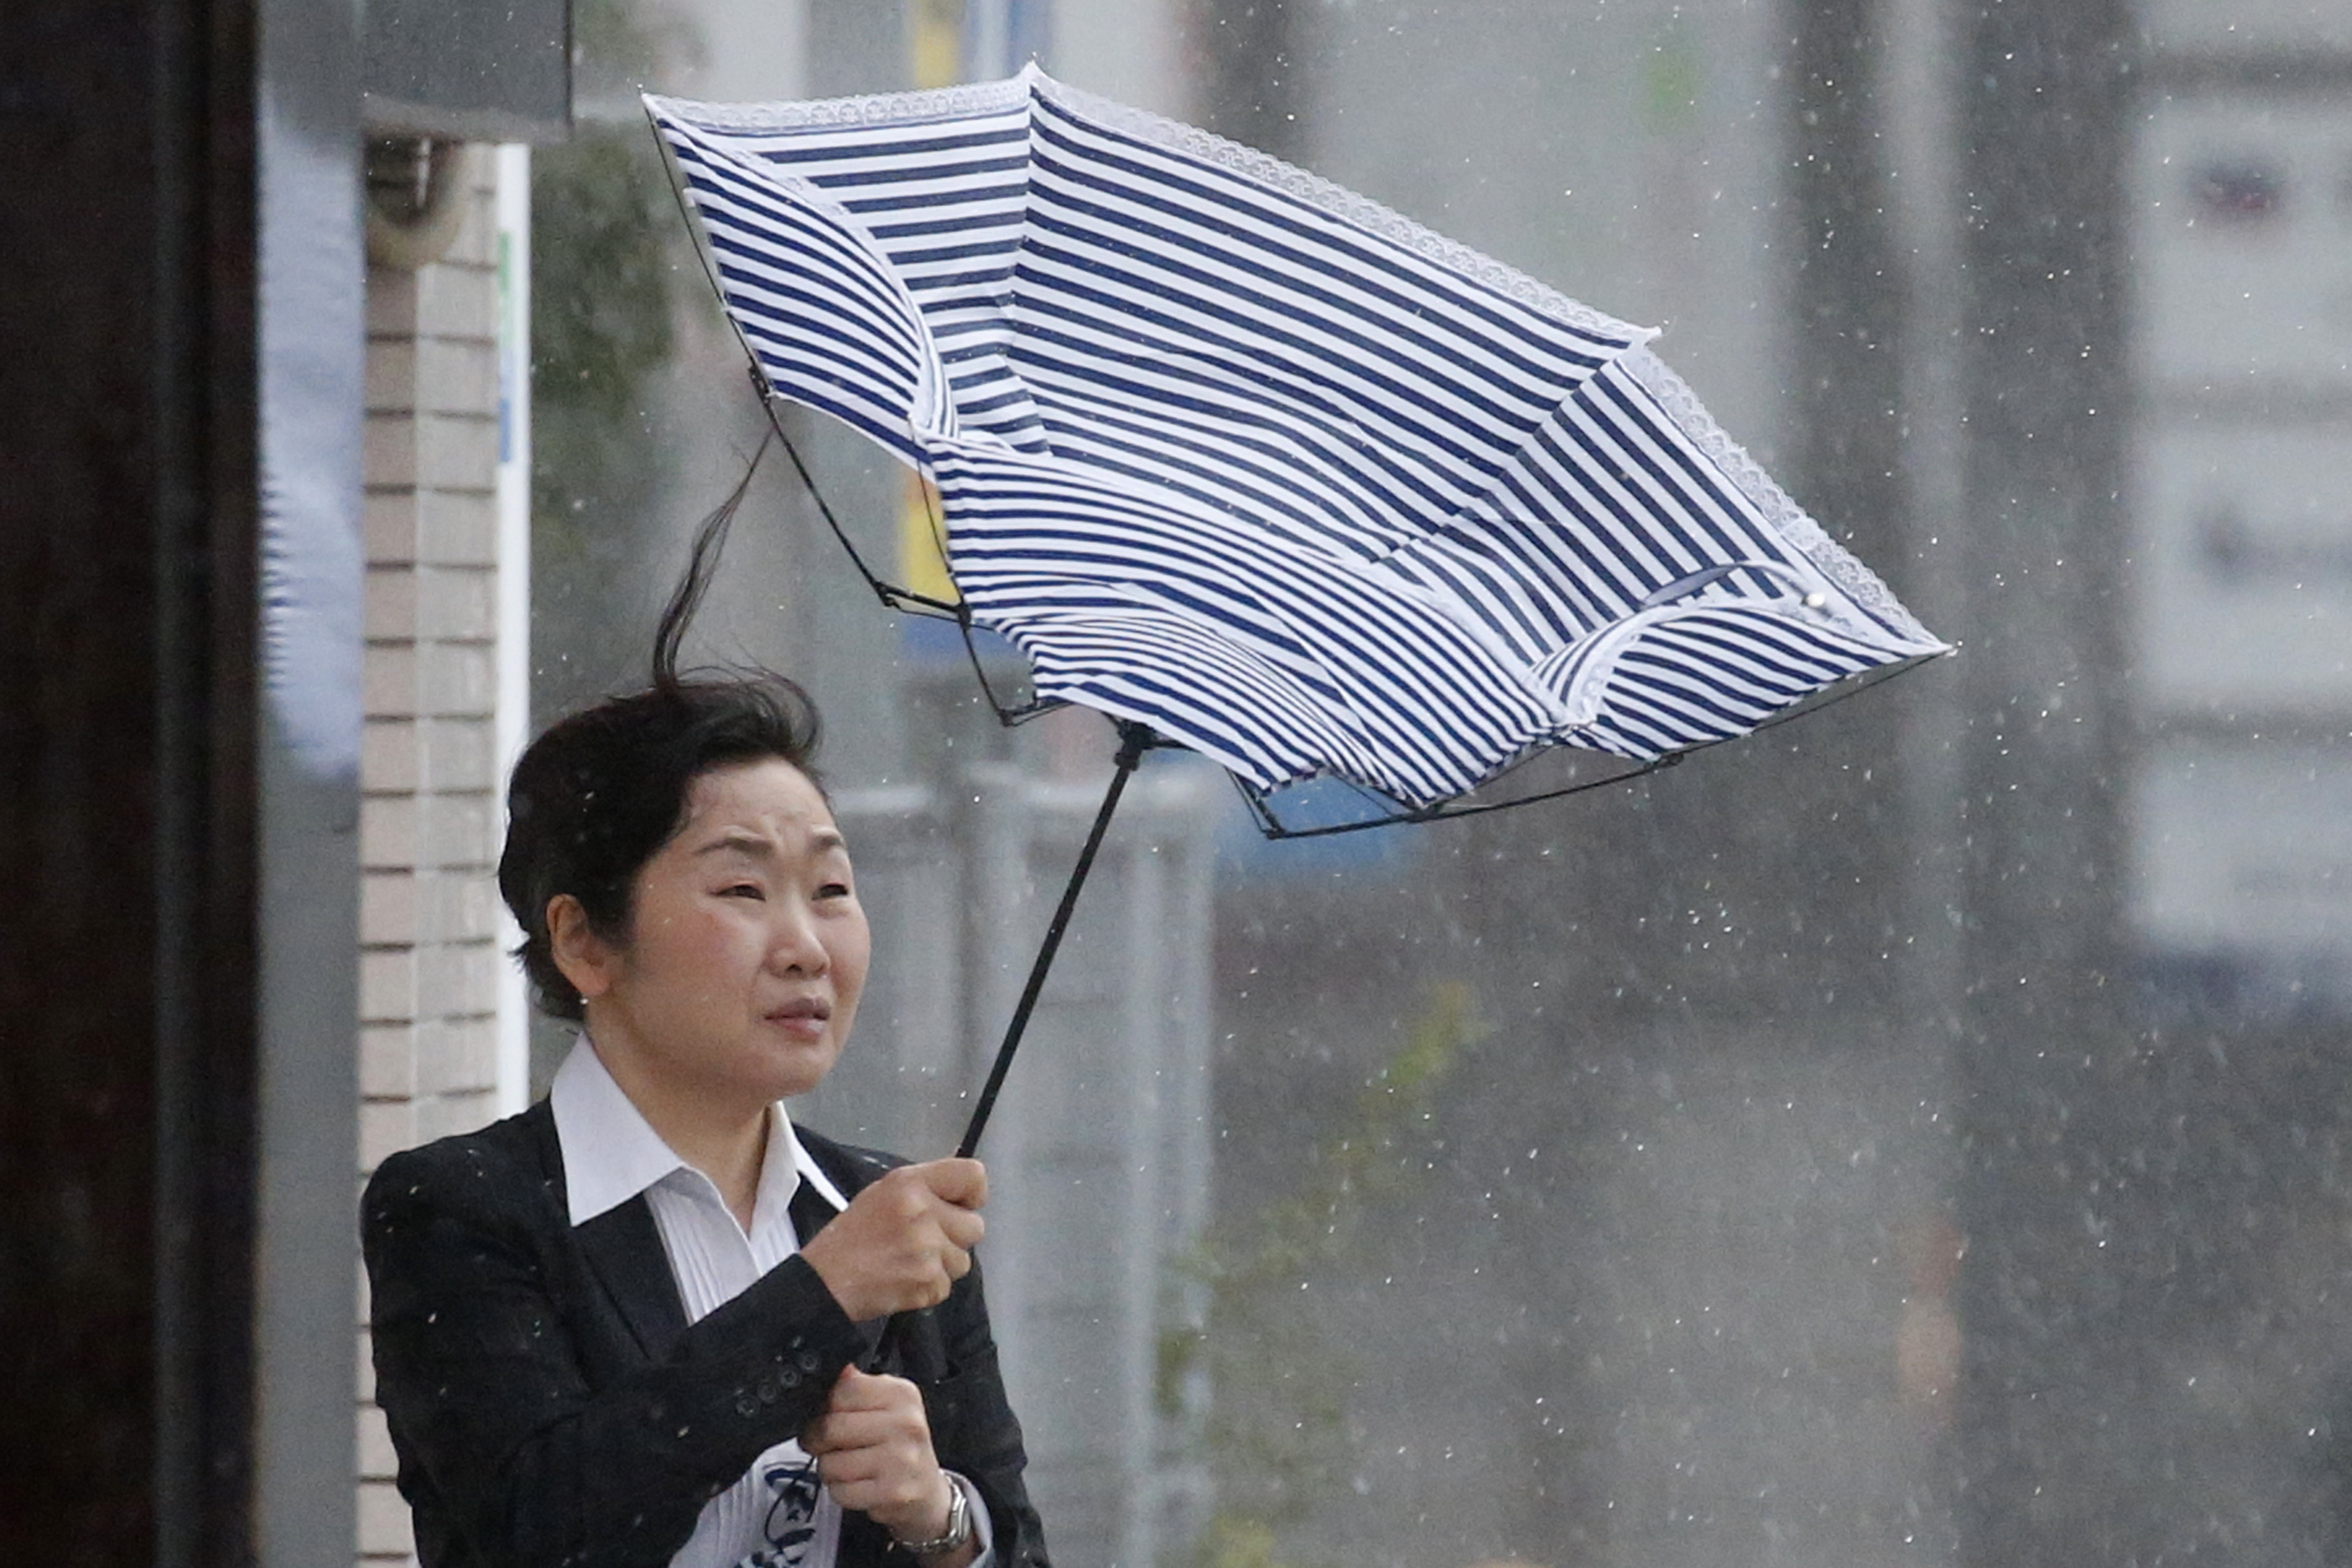 A woman using an umbrella struggles against strong wind and rain caused by Typhoon Jebi, in Tokyo, Japan, Sept. 4, 2018. (Hitoshi Yamada—NurPhoto/Getty Images)